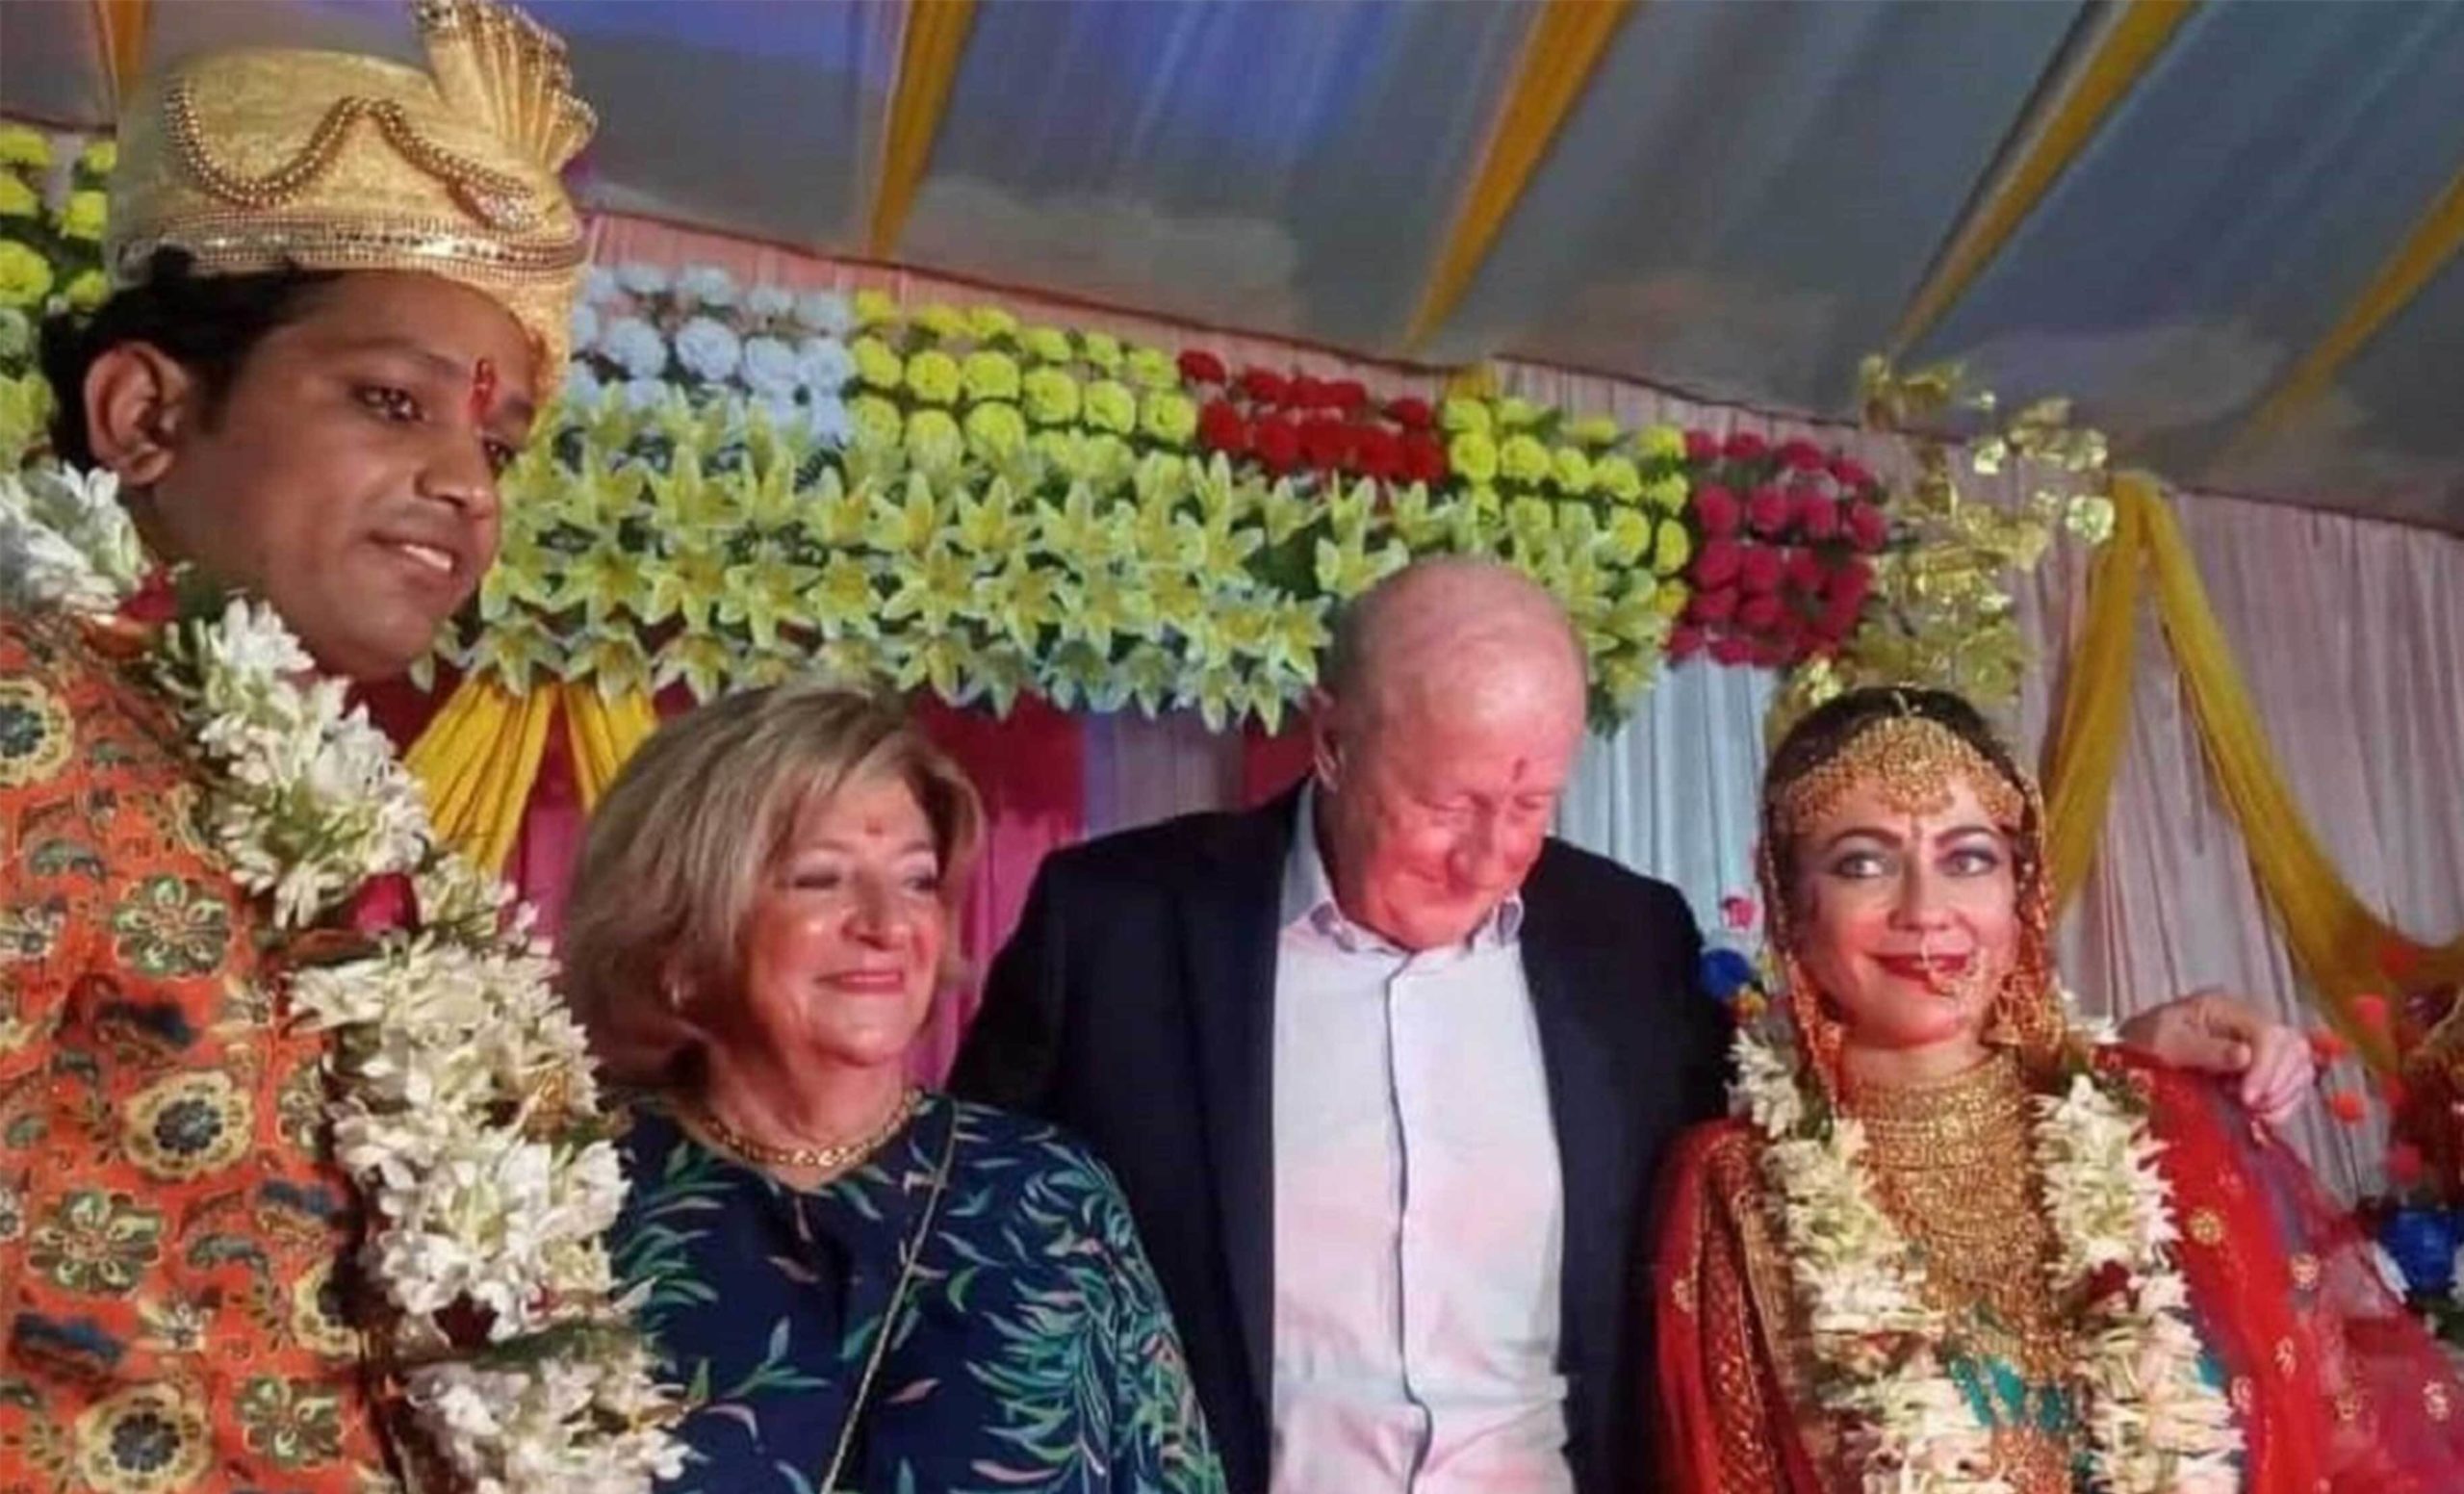 French Woman And A Bihari Tour Guide Get Married In Small Indian Town, Find Well-Wishers From All Over!